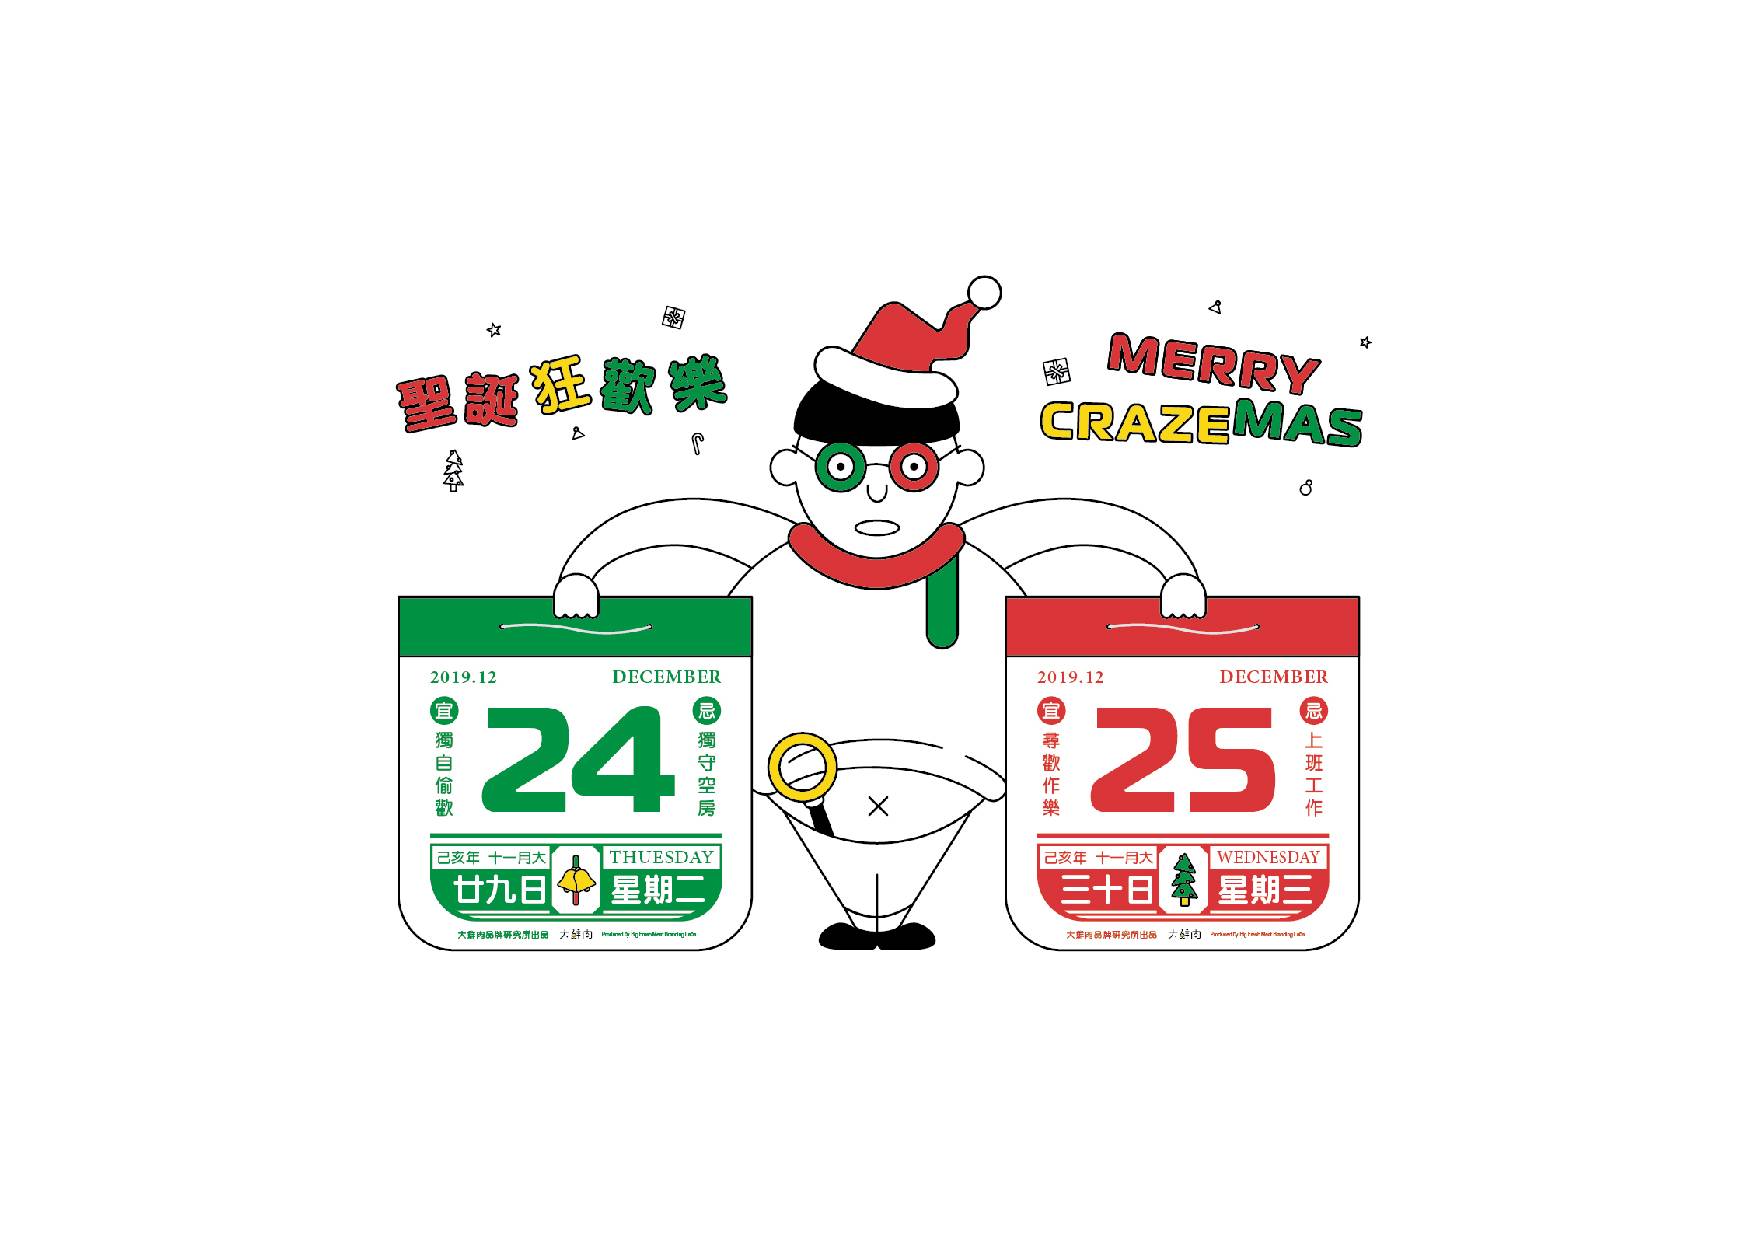 Big Fresh Meat branding for Facebook feeds a fat boy celebration Merry Christmas, wearing round glasses and a Santa hat, carrying a calendar